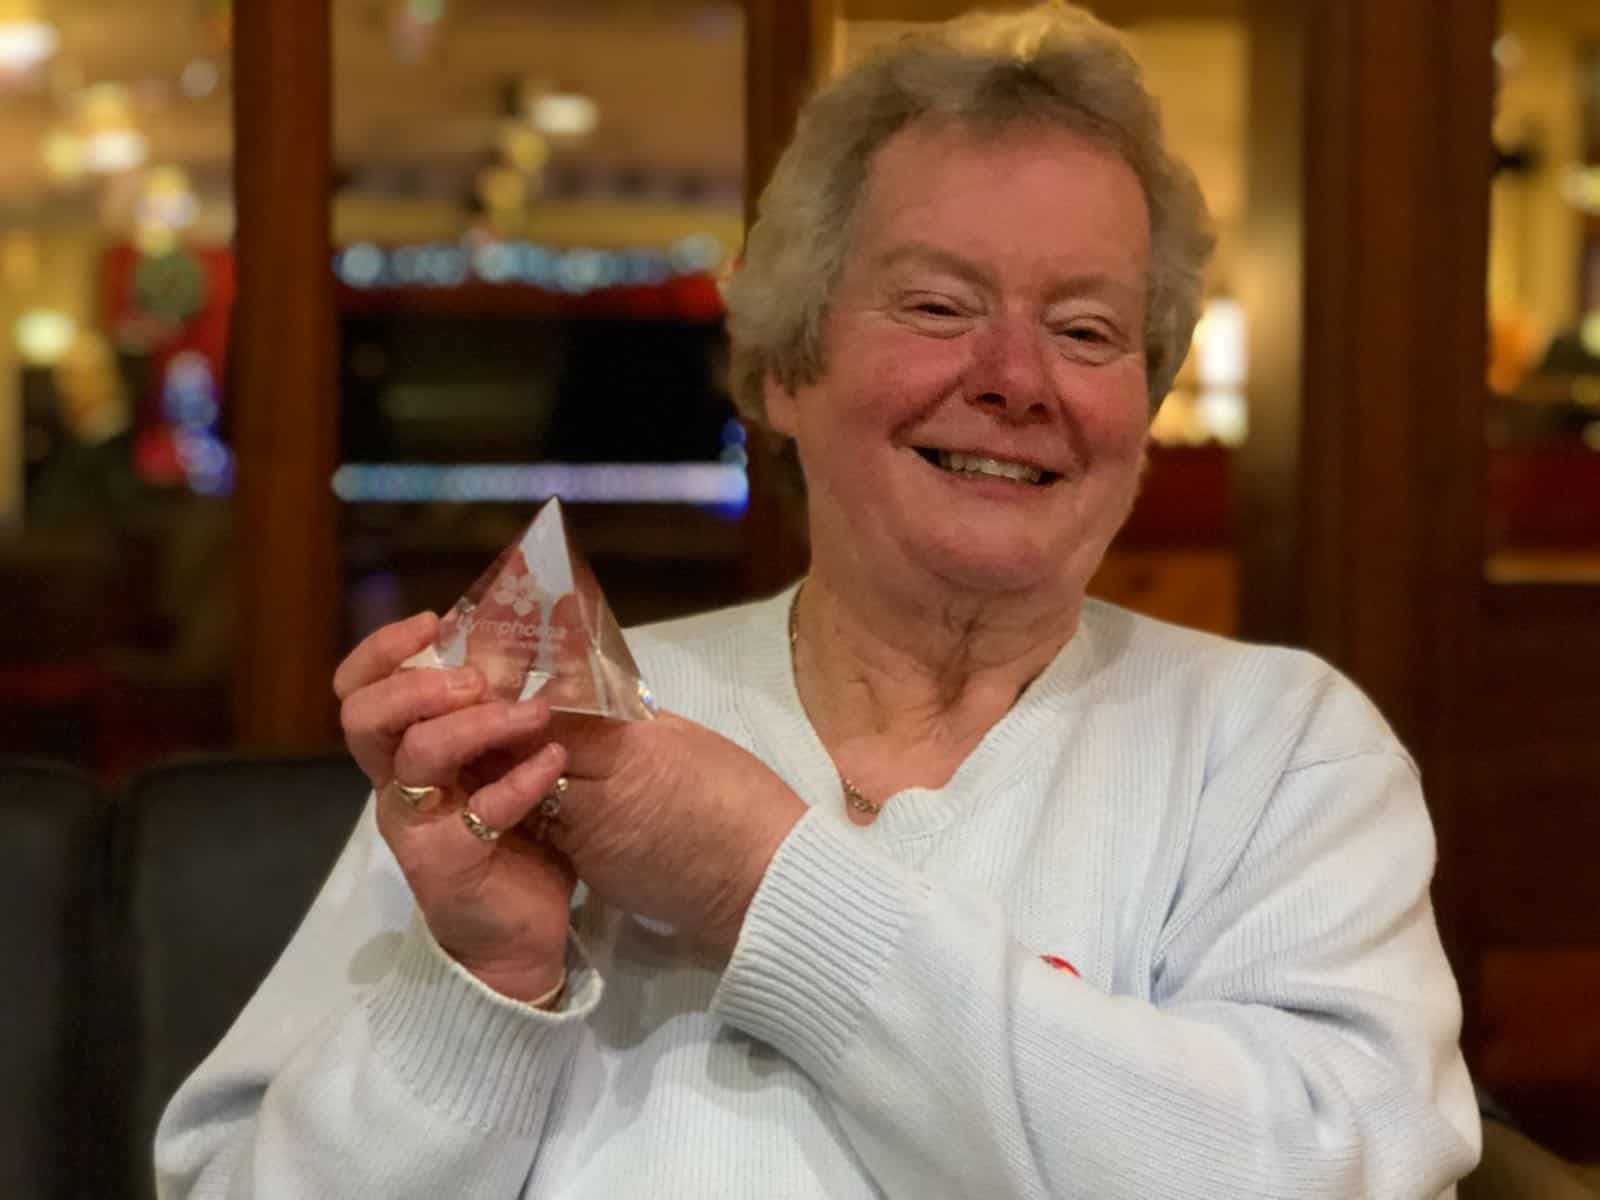 Carol Miller, founder of York Haematology Support group and Acute Myeloid Leukaemia survivor smiling and holding an award from the Lymphoma Association.